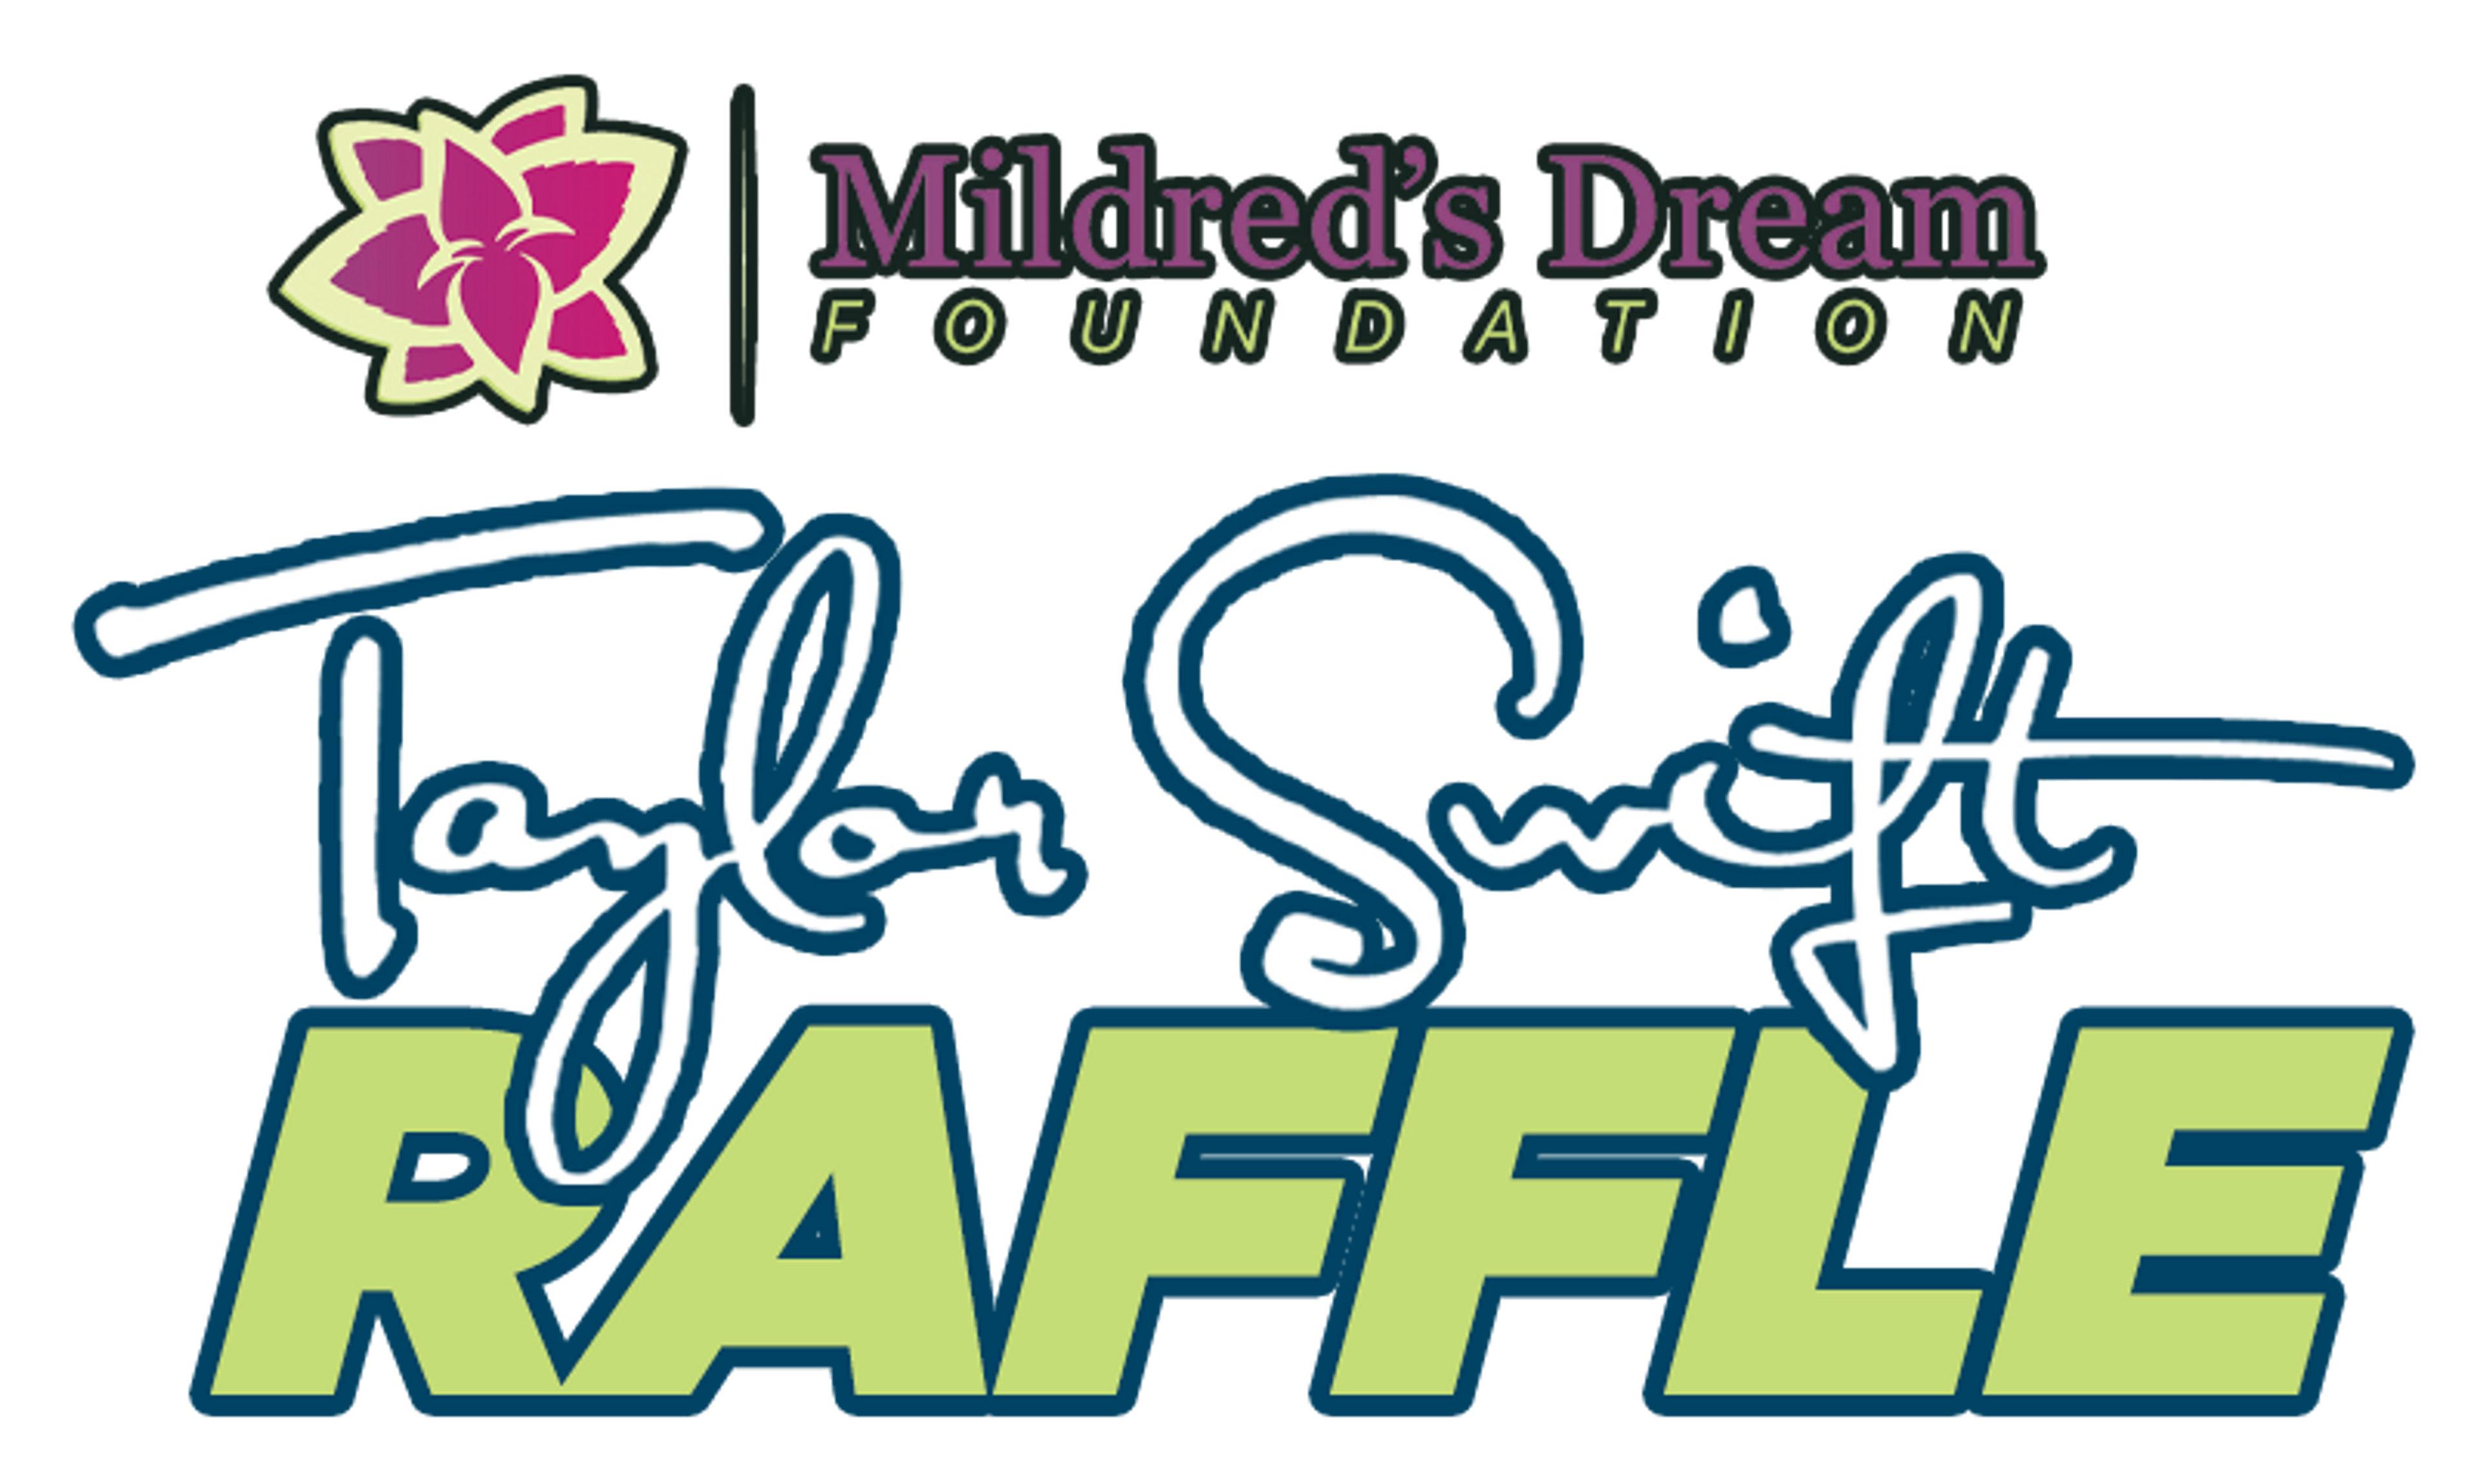 Taylor Swift Ticket Raffle presented by Mildred's Dream Foundation logo image